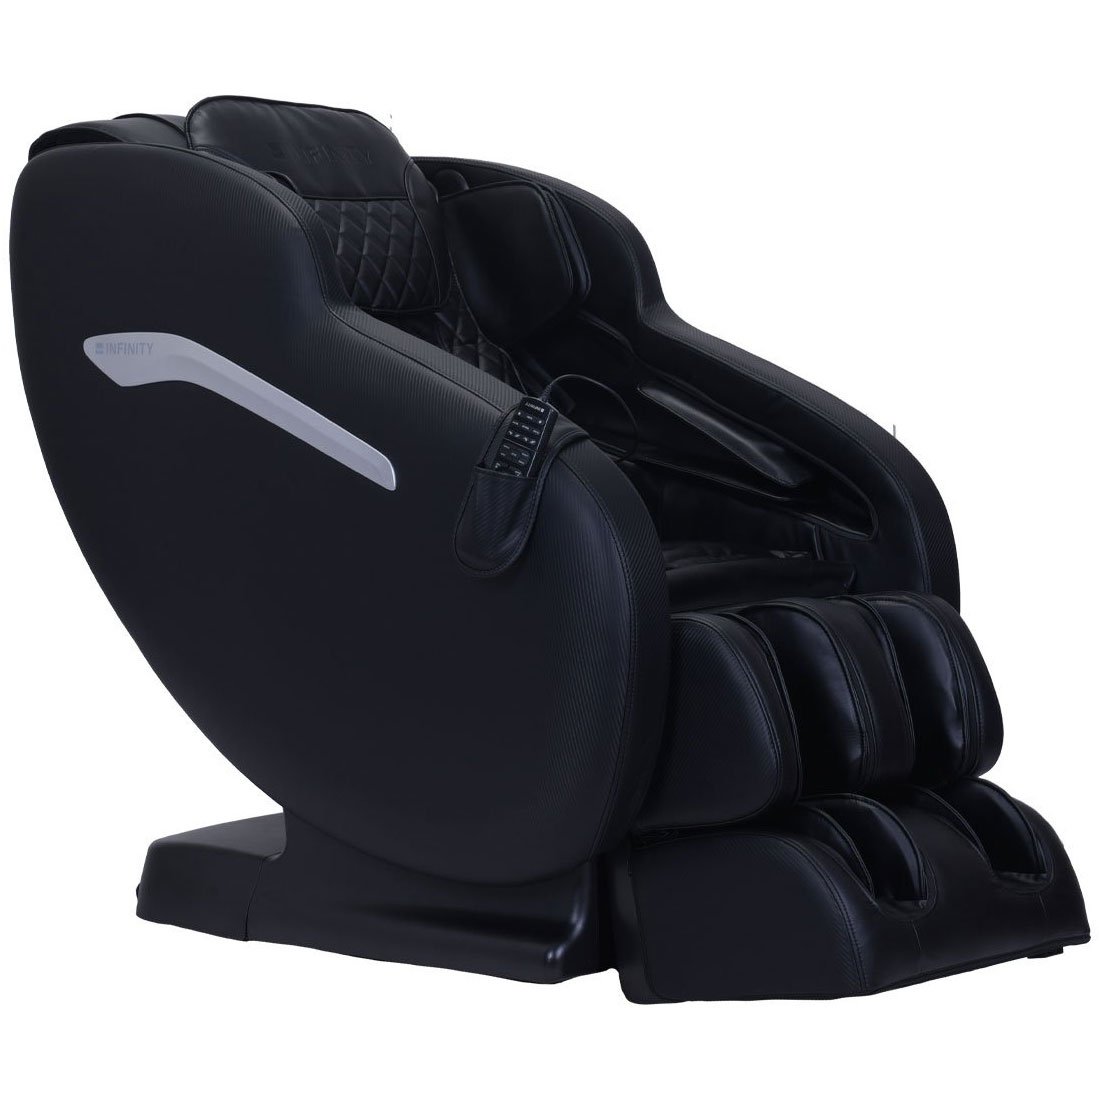 Profile image of a black Infinity Aura massage chair.